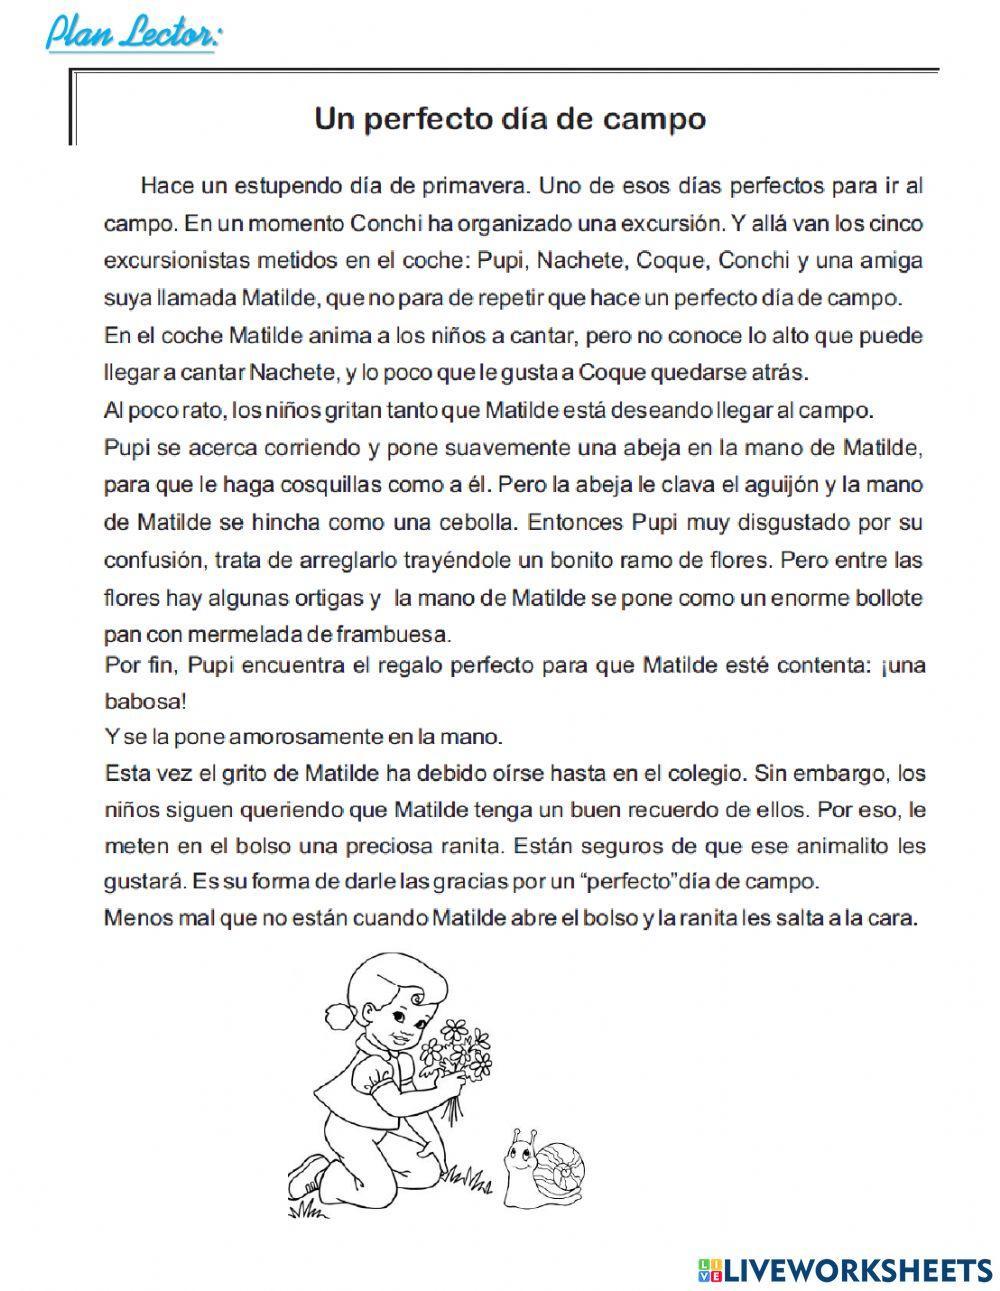 Lectura comprensiva online exercise for 5TO DE PRIMARIA | Live Worksheets